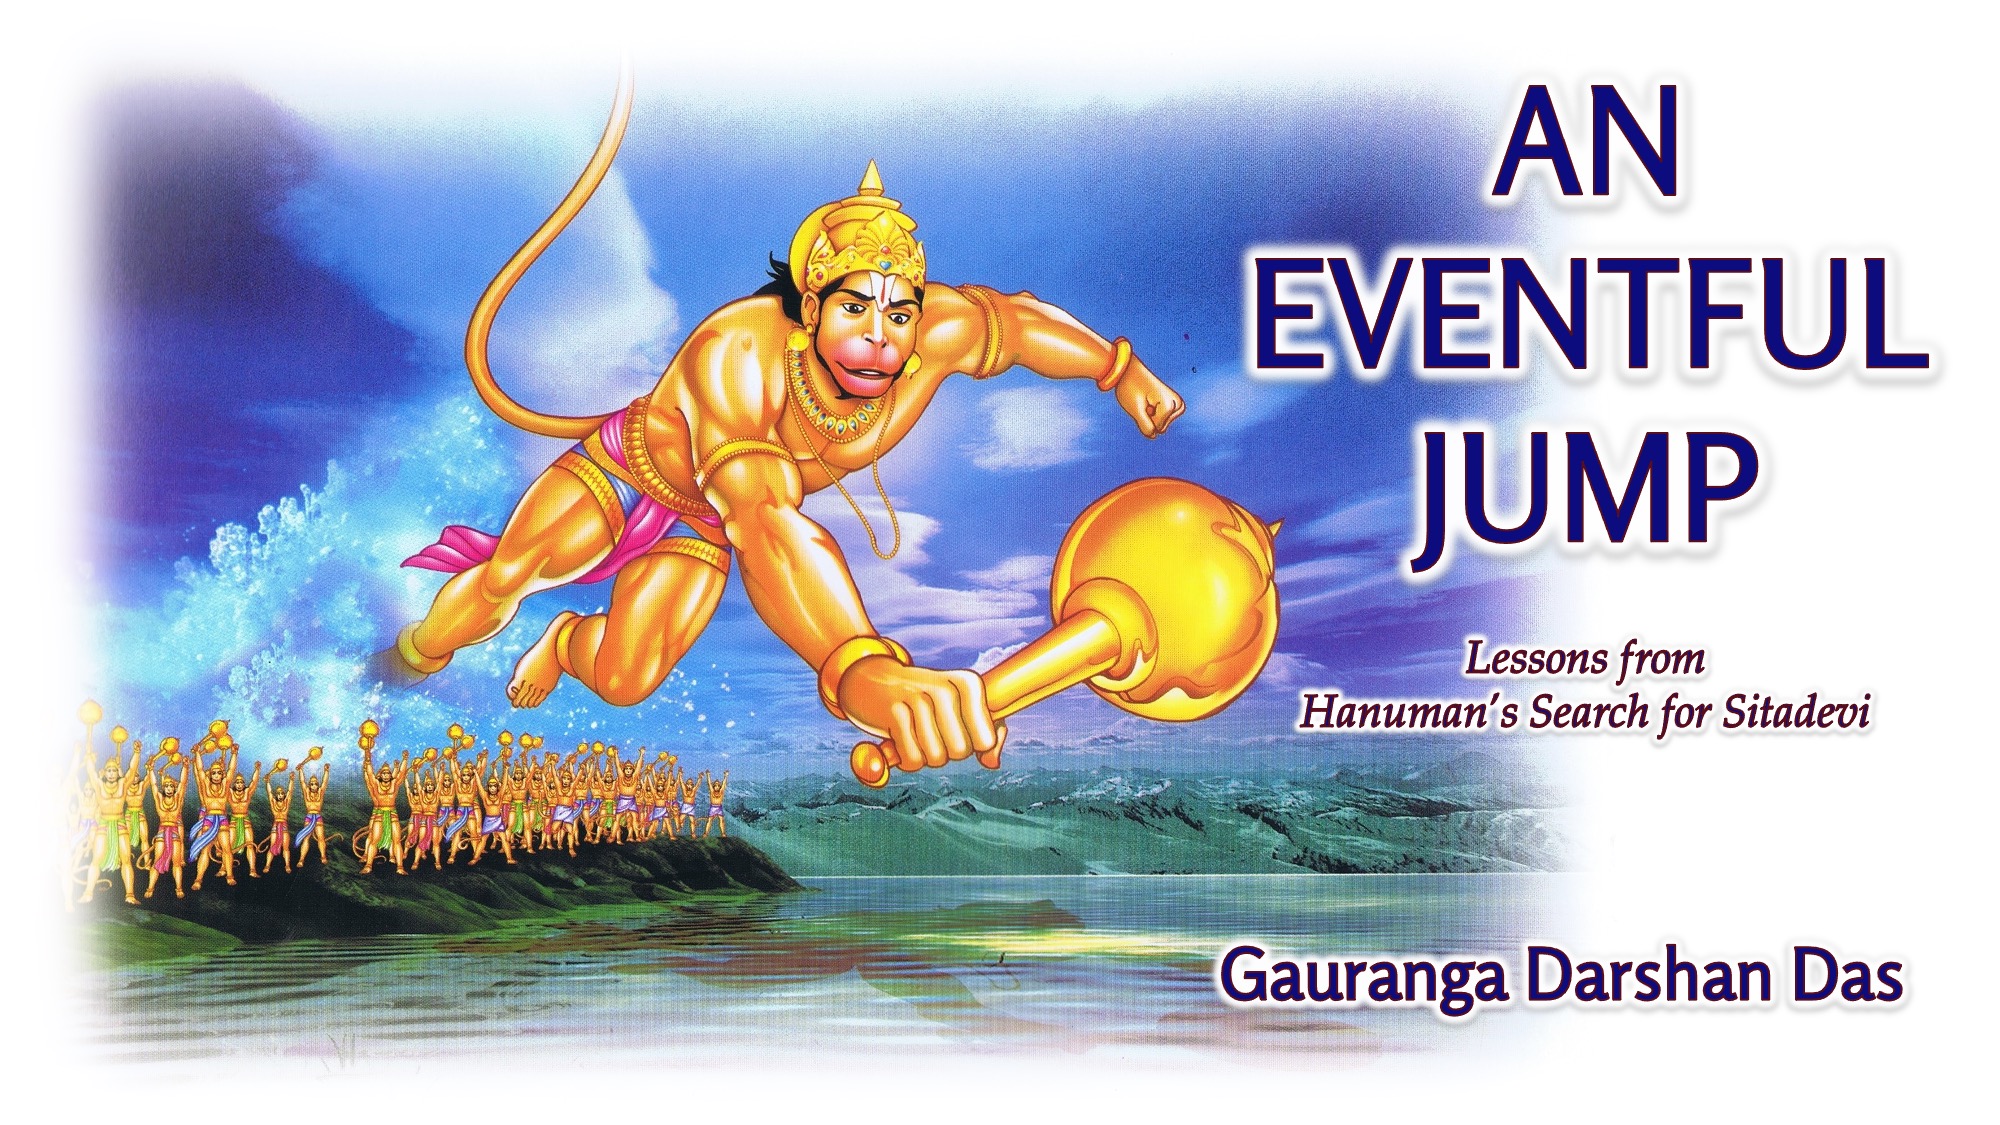 An Eventful Jump: Lessons from Hanuman’s Search for Mother Sita